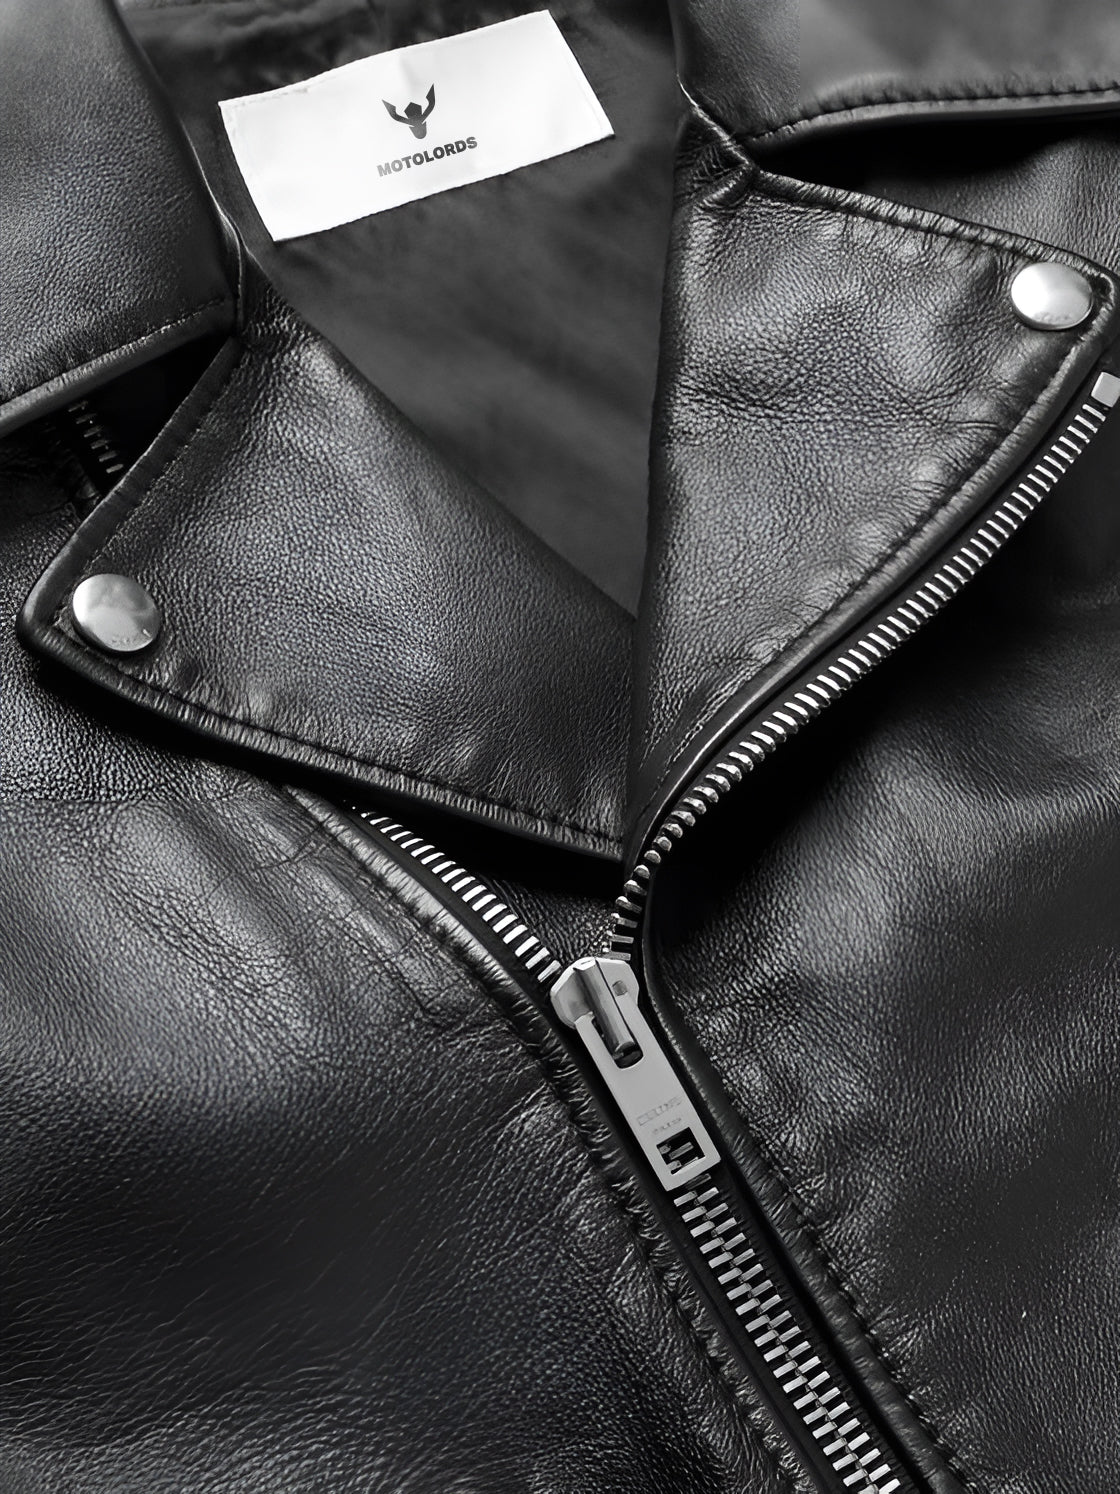 50s Perfecto Cowhide Leather Moto Jacket